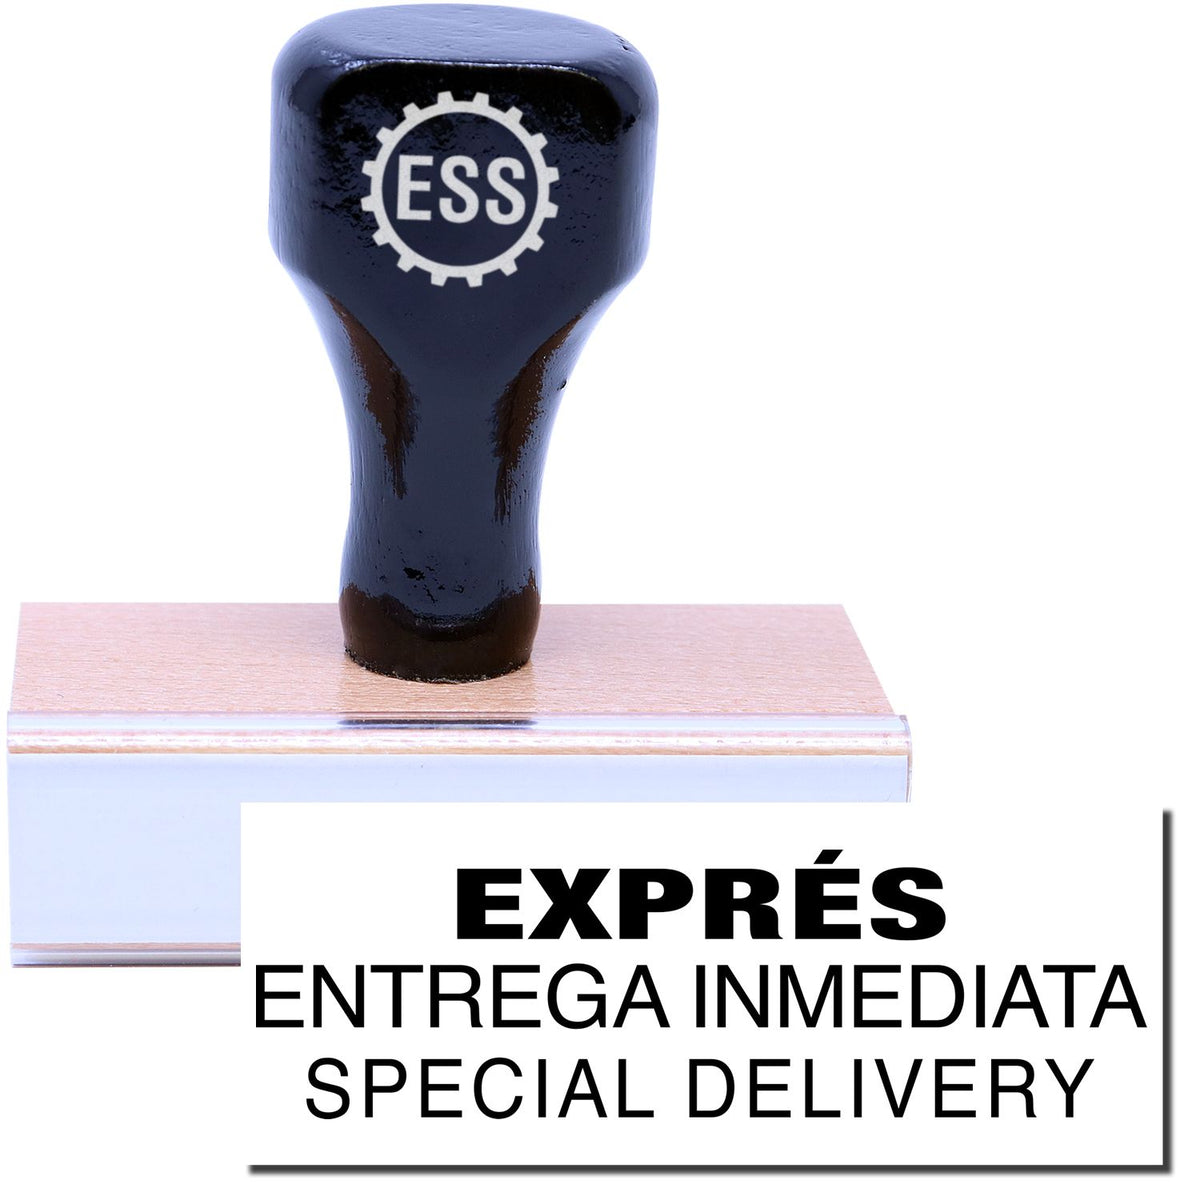 A stock office rubber stamp with a stamped image showing how the text &quot;EXPRES ENTREGA IMMEDIATA SPECIAL DELIVERY&quot; is displayed after stamping.